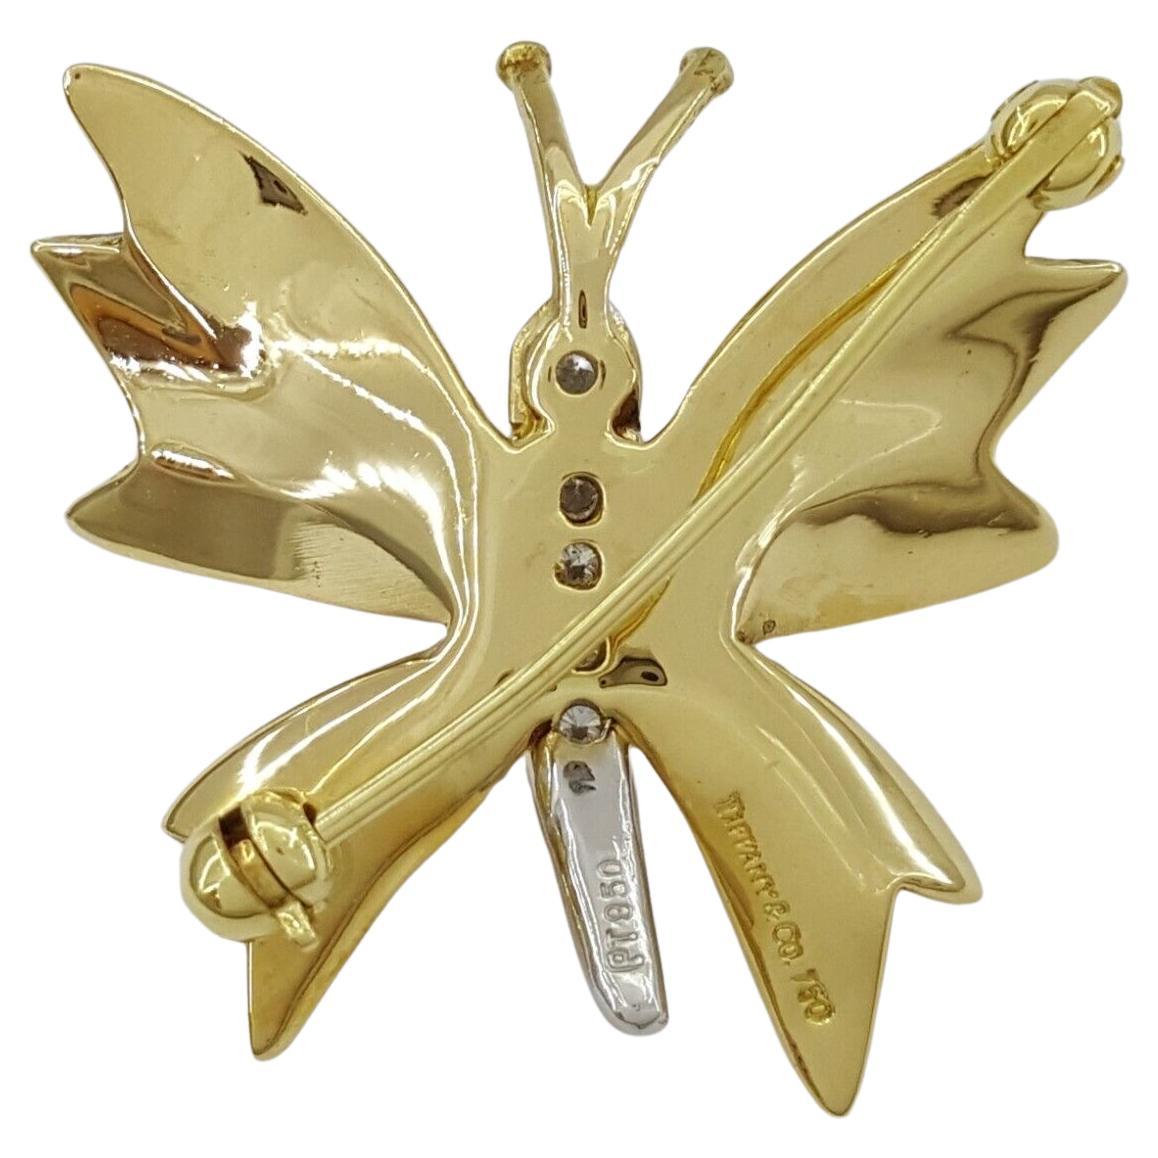 Genuine Tiffany & Co. presents an exquisite 18K Yellow Gold & Platinum Butterfly Brooch / Pin adorned with a Round Cut Diamond totaling 0.09 carats.

This stunning piece weighs 5.5 grams and measures 25mm (1